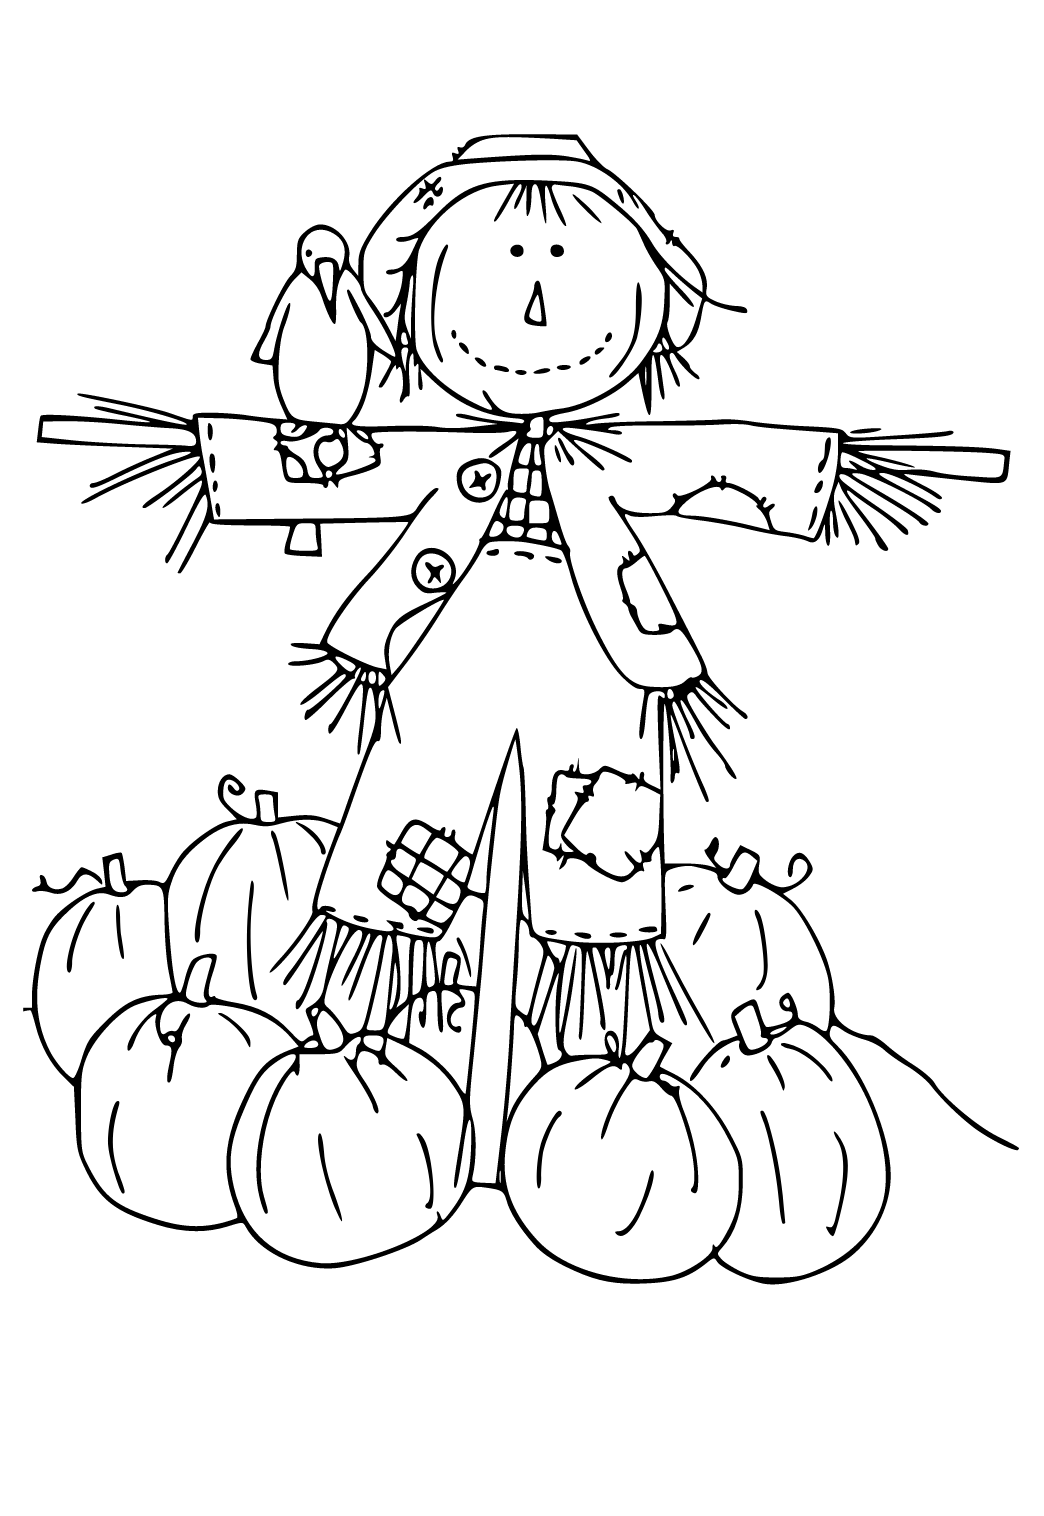 scarecrow head coloring pages